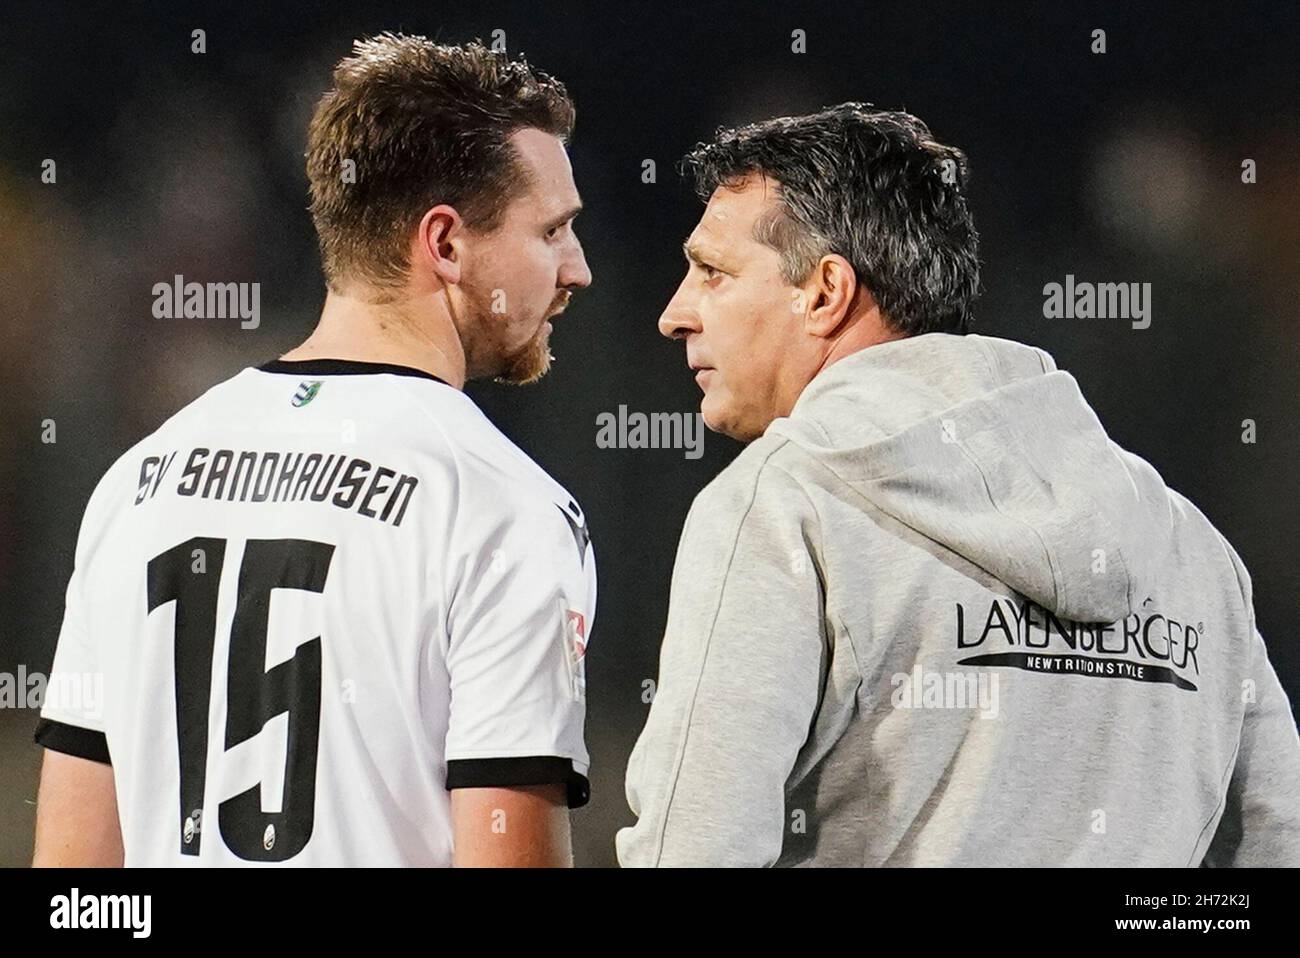 L And Coach High Resolution Stock Photography and Images - Page 6 - Alamy